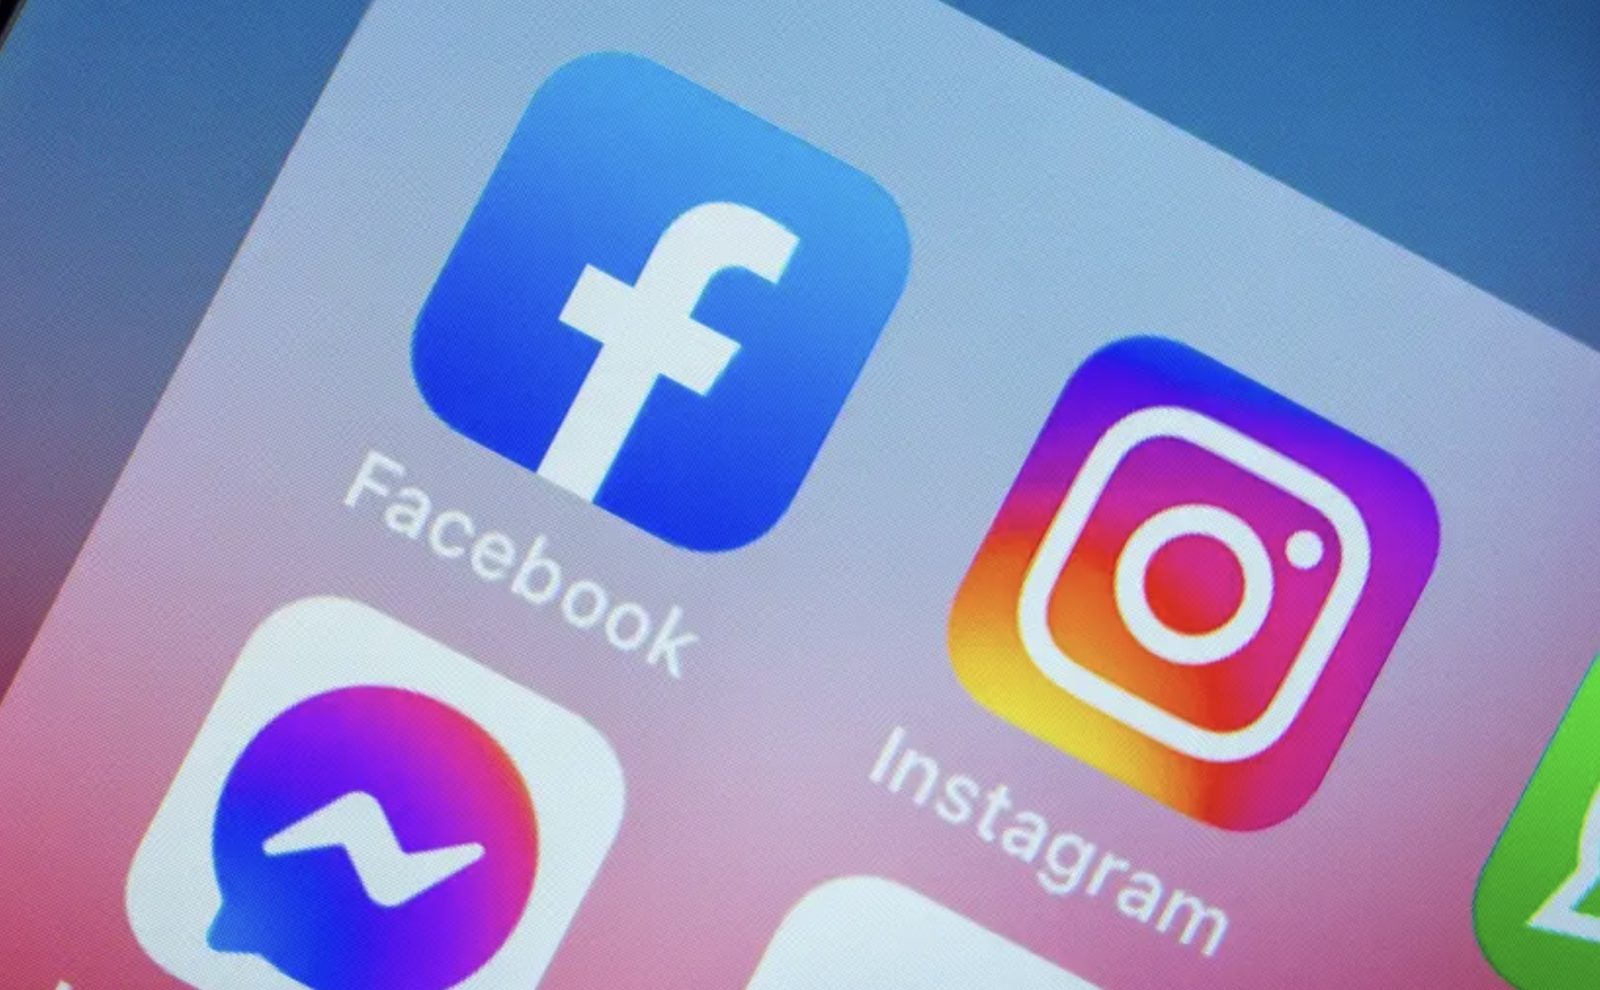 Chronological order will return to Facebook and Instagram, and it will be possible to turn off “recommended” content.